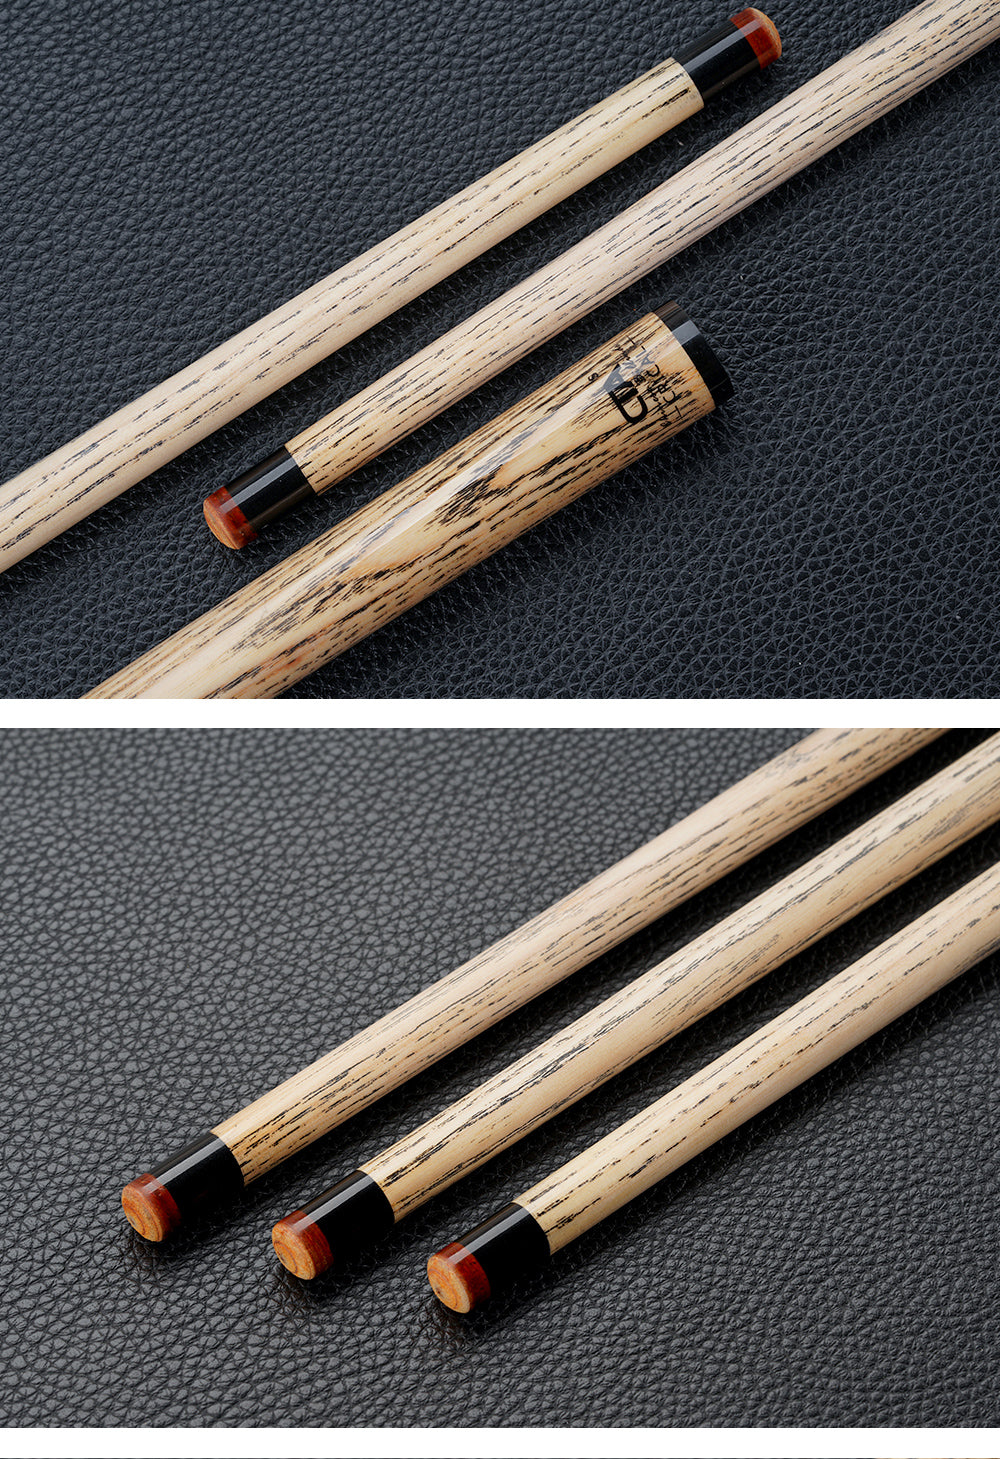 CRICAL Technologia Shaft for Pool Cue, Tiger Tip, Selected Ash Wood Shaft, 11.5mm 3/8*8 Radial Pin Joint Single Shaft